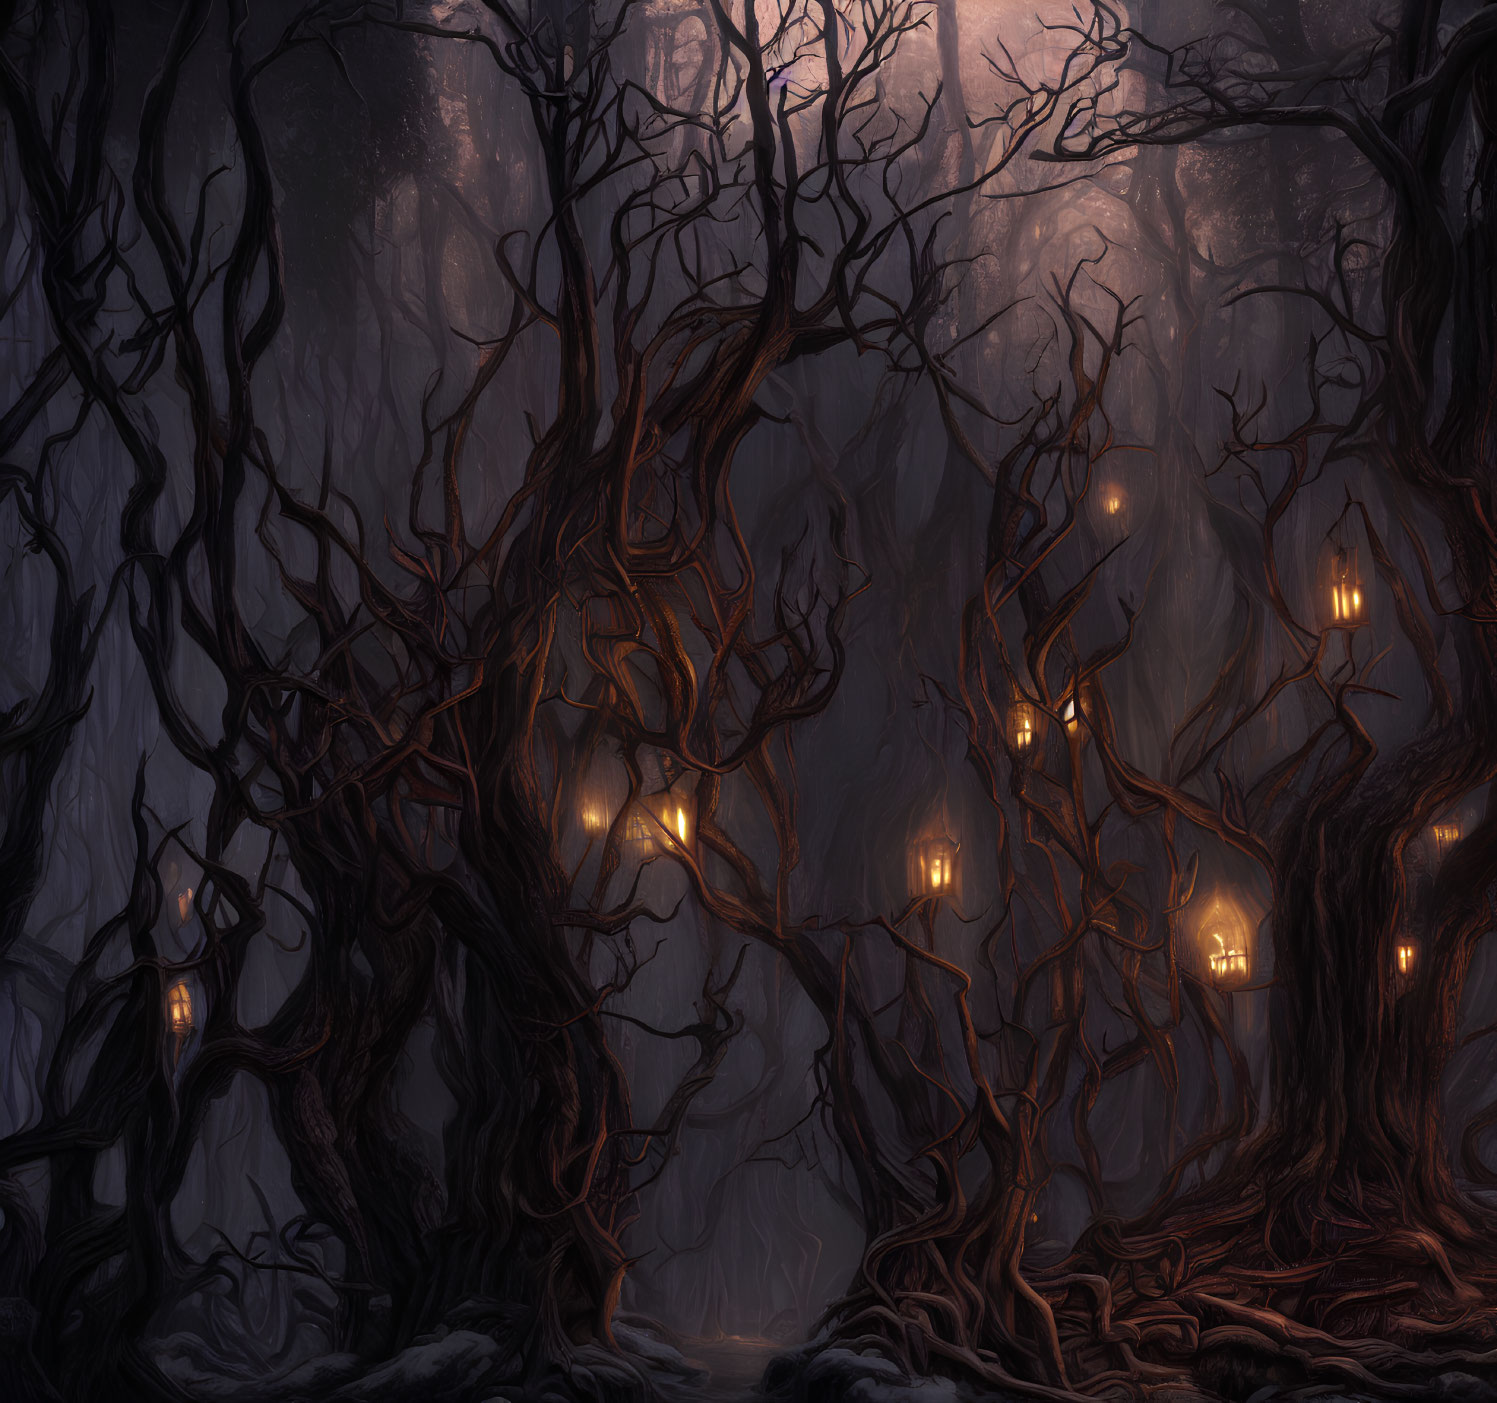 Eerie forest scene with gnarled trees and lanterns in twilight landscape